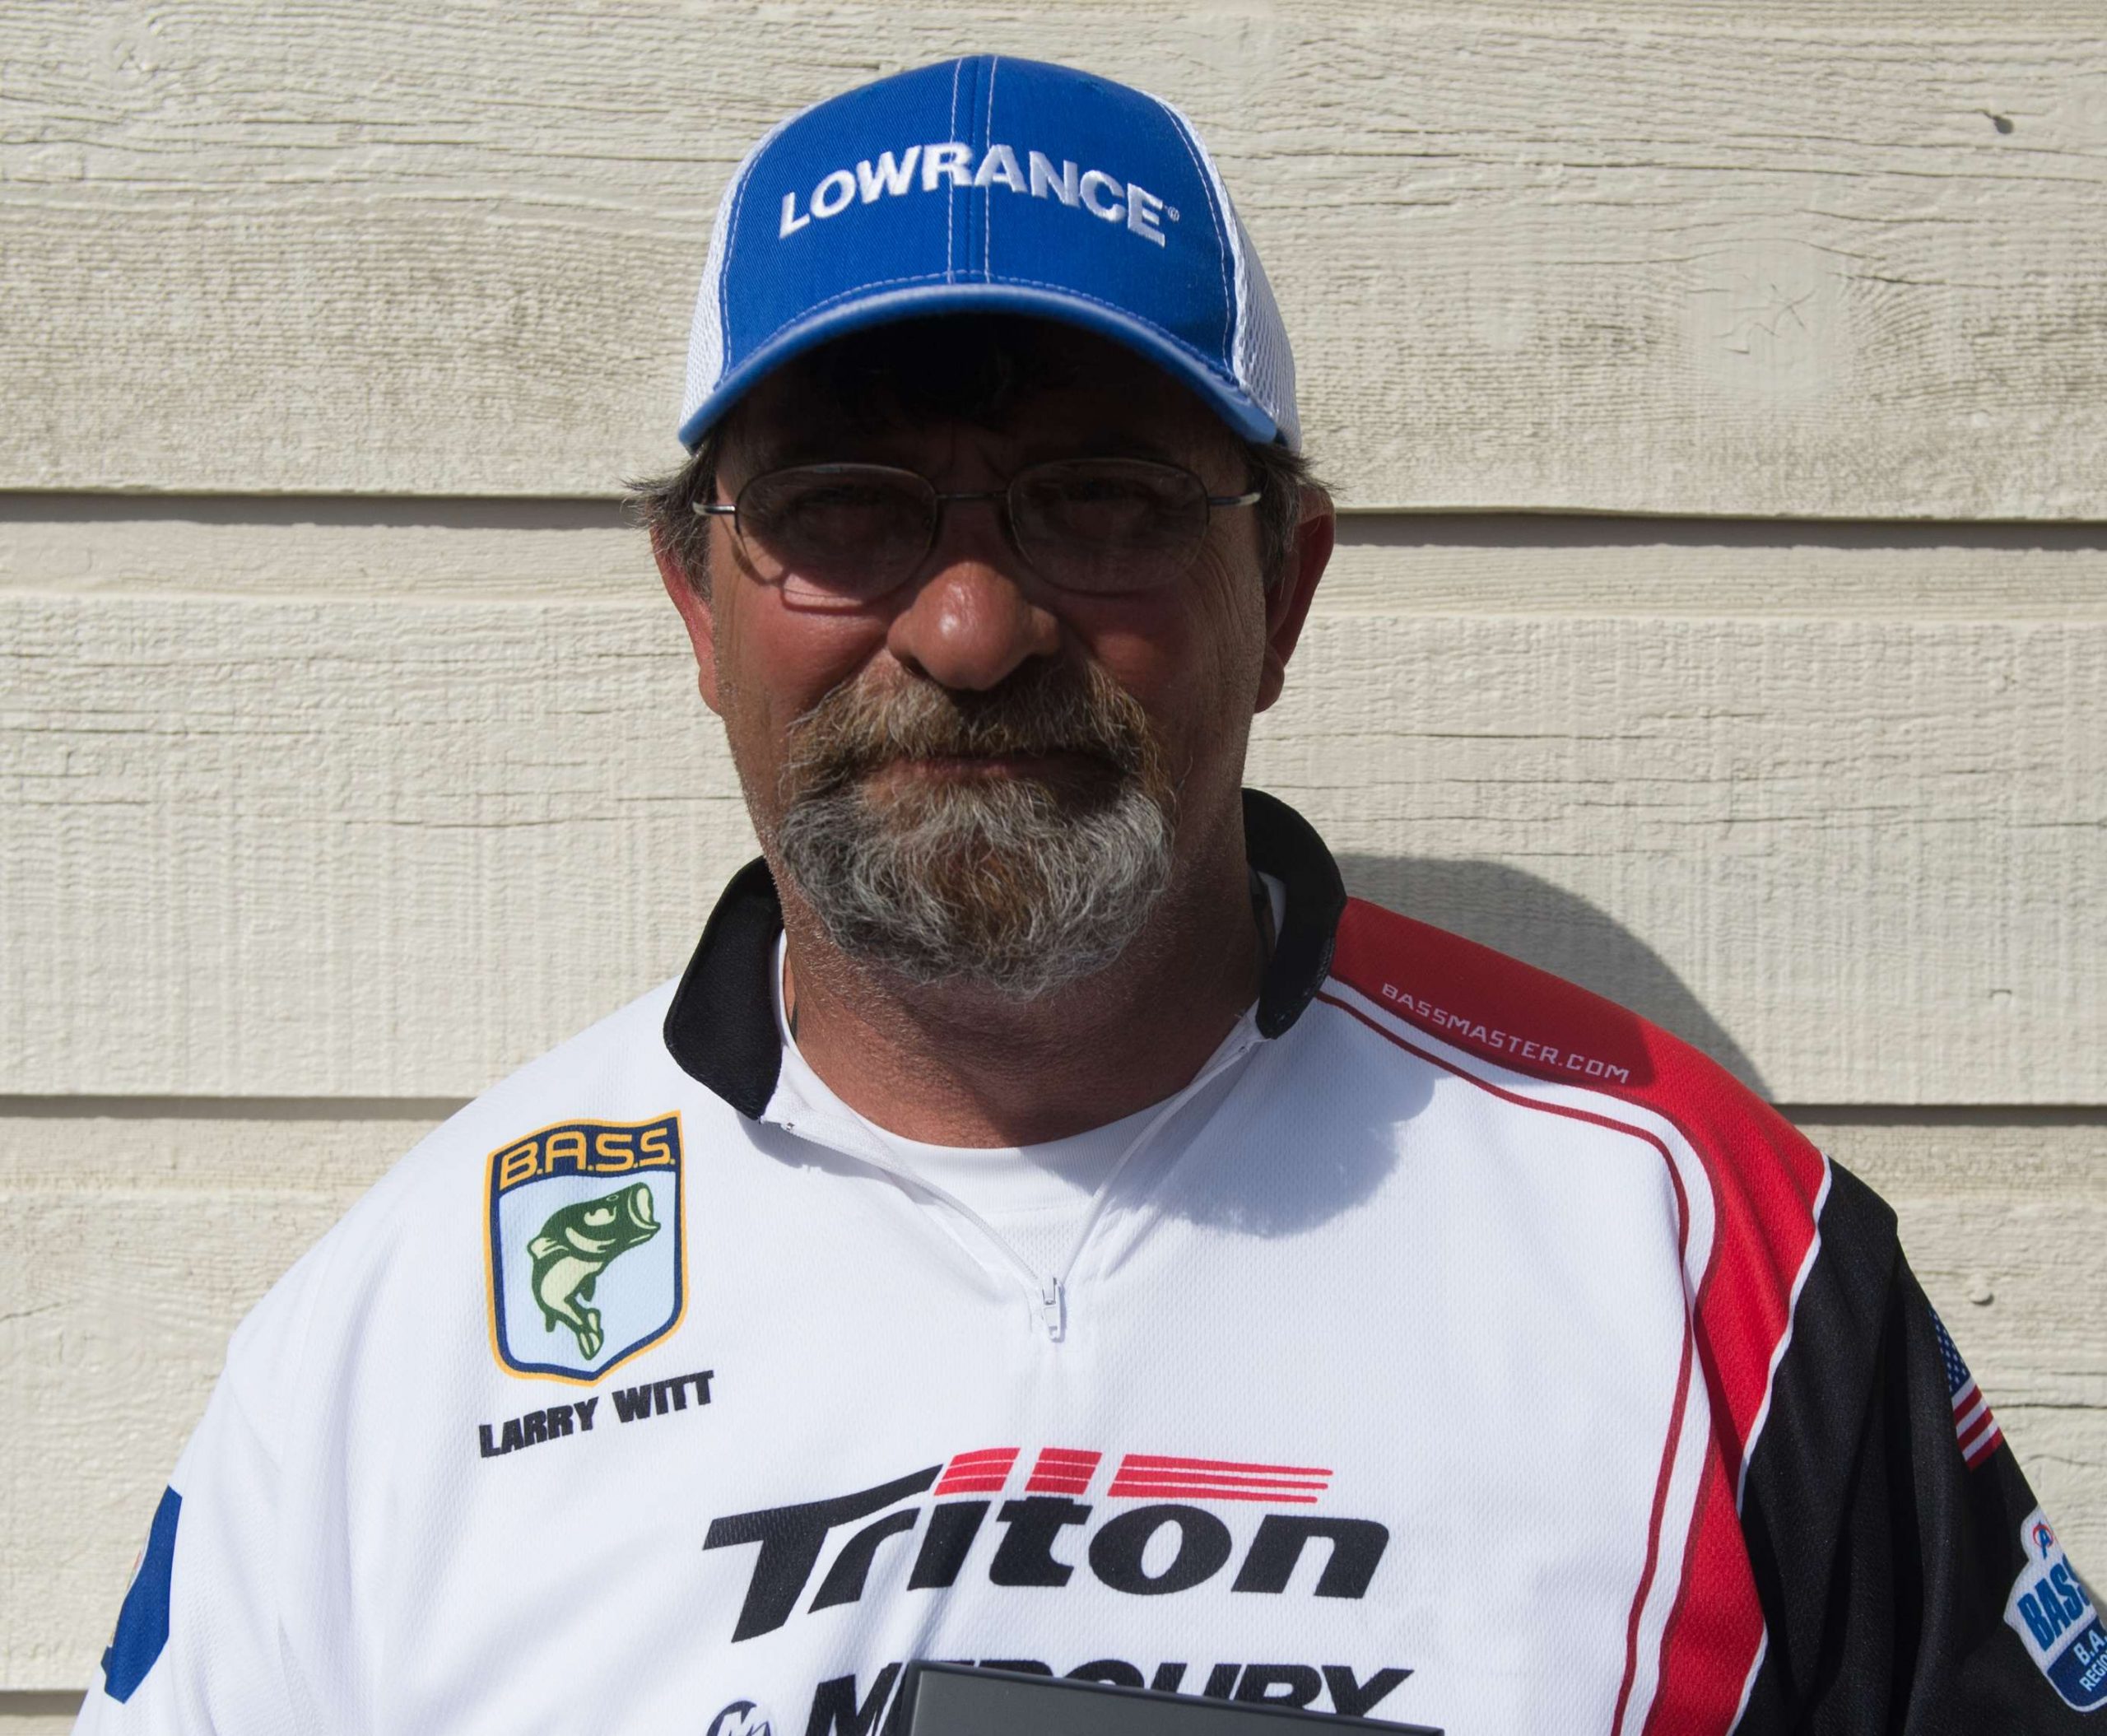 Larry Witt <br>
Virginia Nonboater <br>
Larry Witt likes seeing fish up close, and not just on the end of his line. When heâs not bass fishing, you can probably catch him scuba diving. Heâs a member of Virginiaâs Backyard Bassmasters, and heâs sponsored by Pro Choice Sporting Goods. 